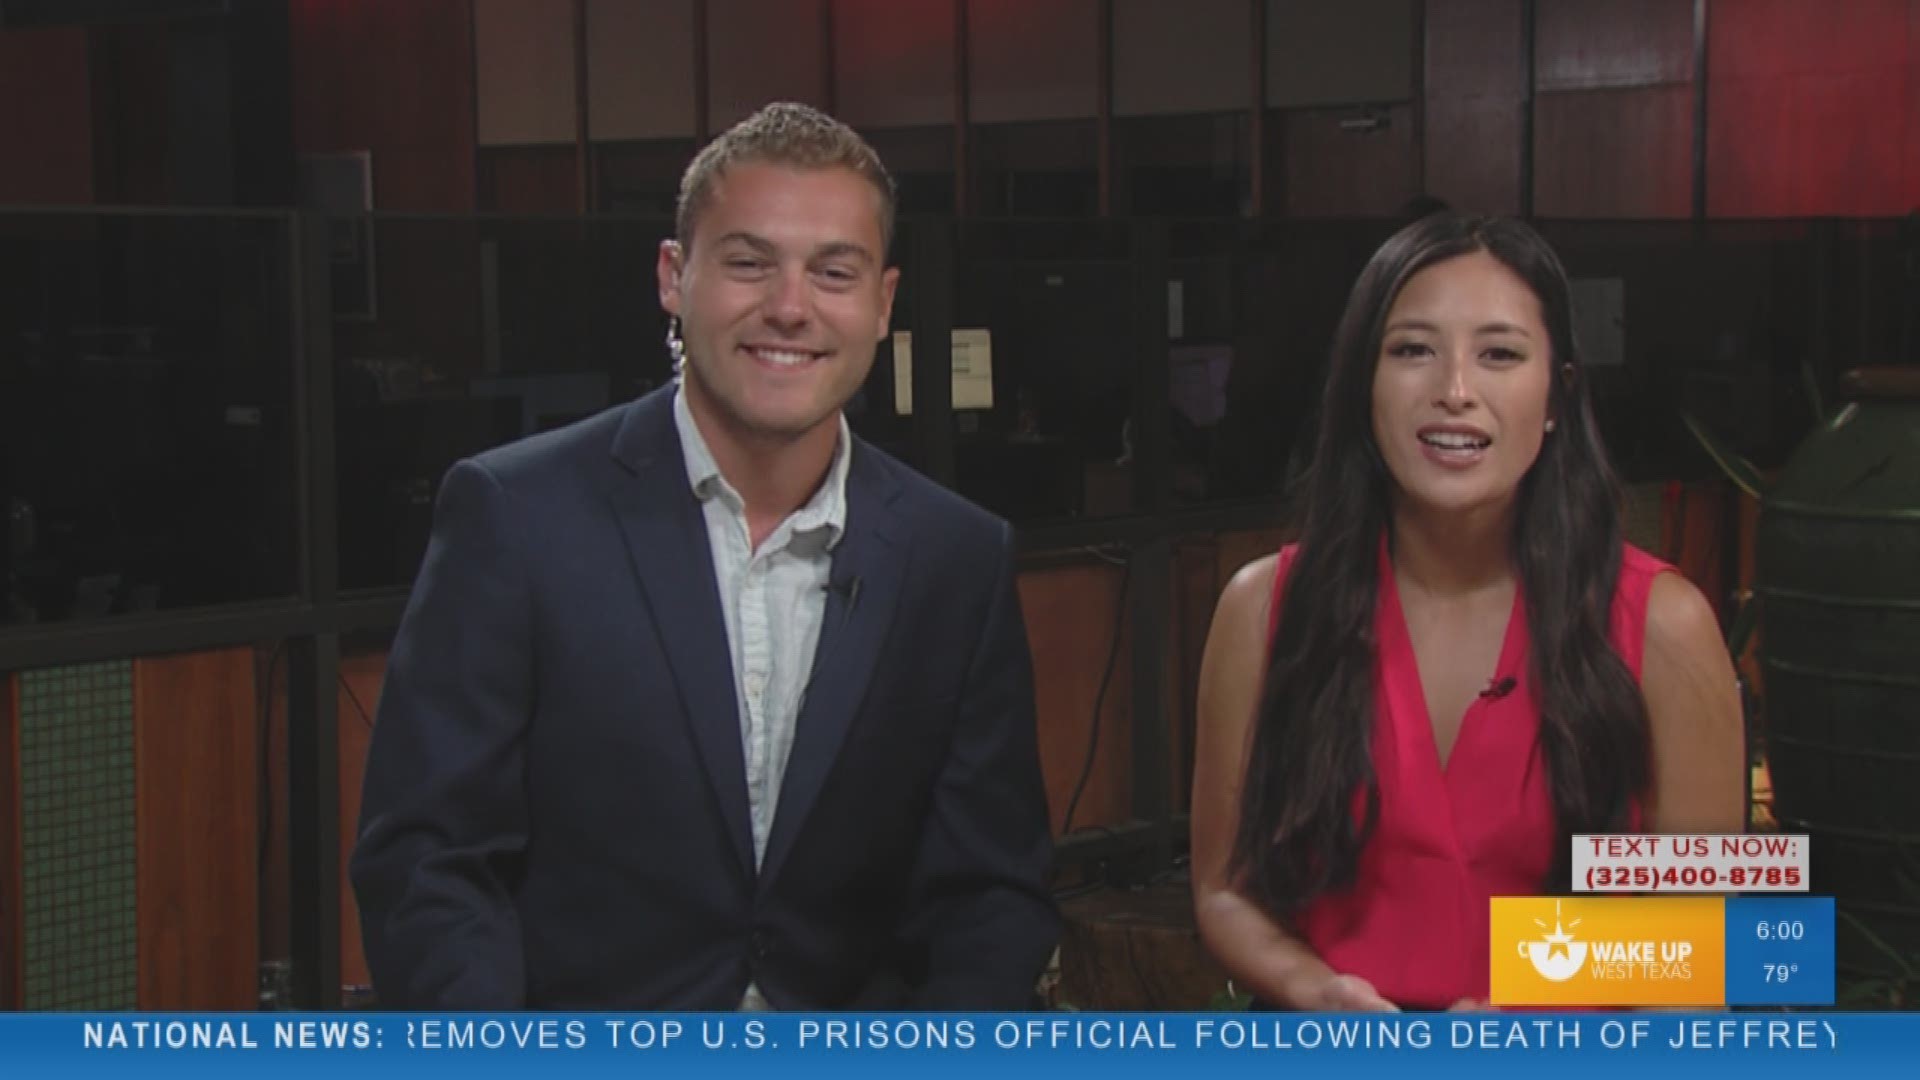 Welcome back Camille! Get caught up on your Tuesday morning headlines including a bomb threat in Abilene and a possible ICE detention center coming to Anson.